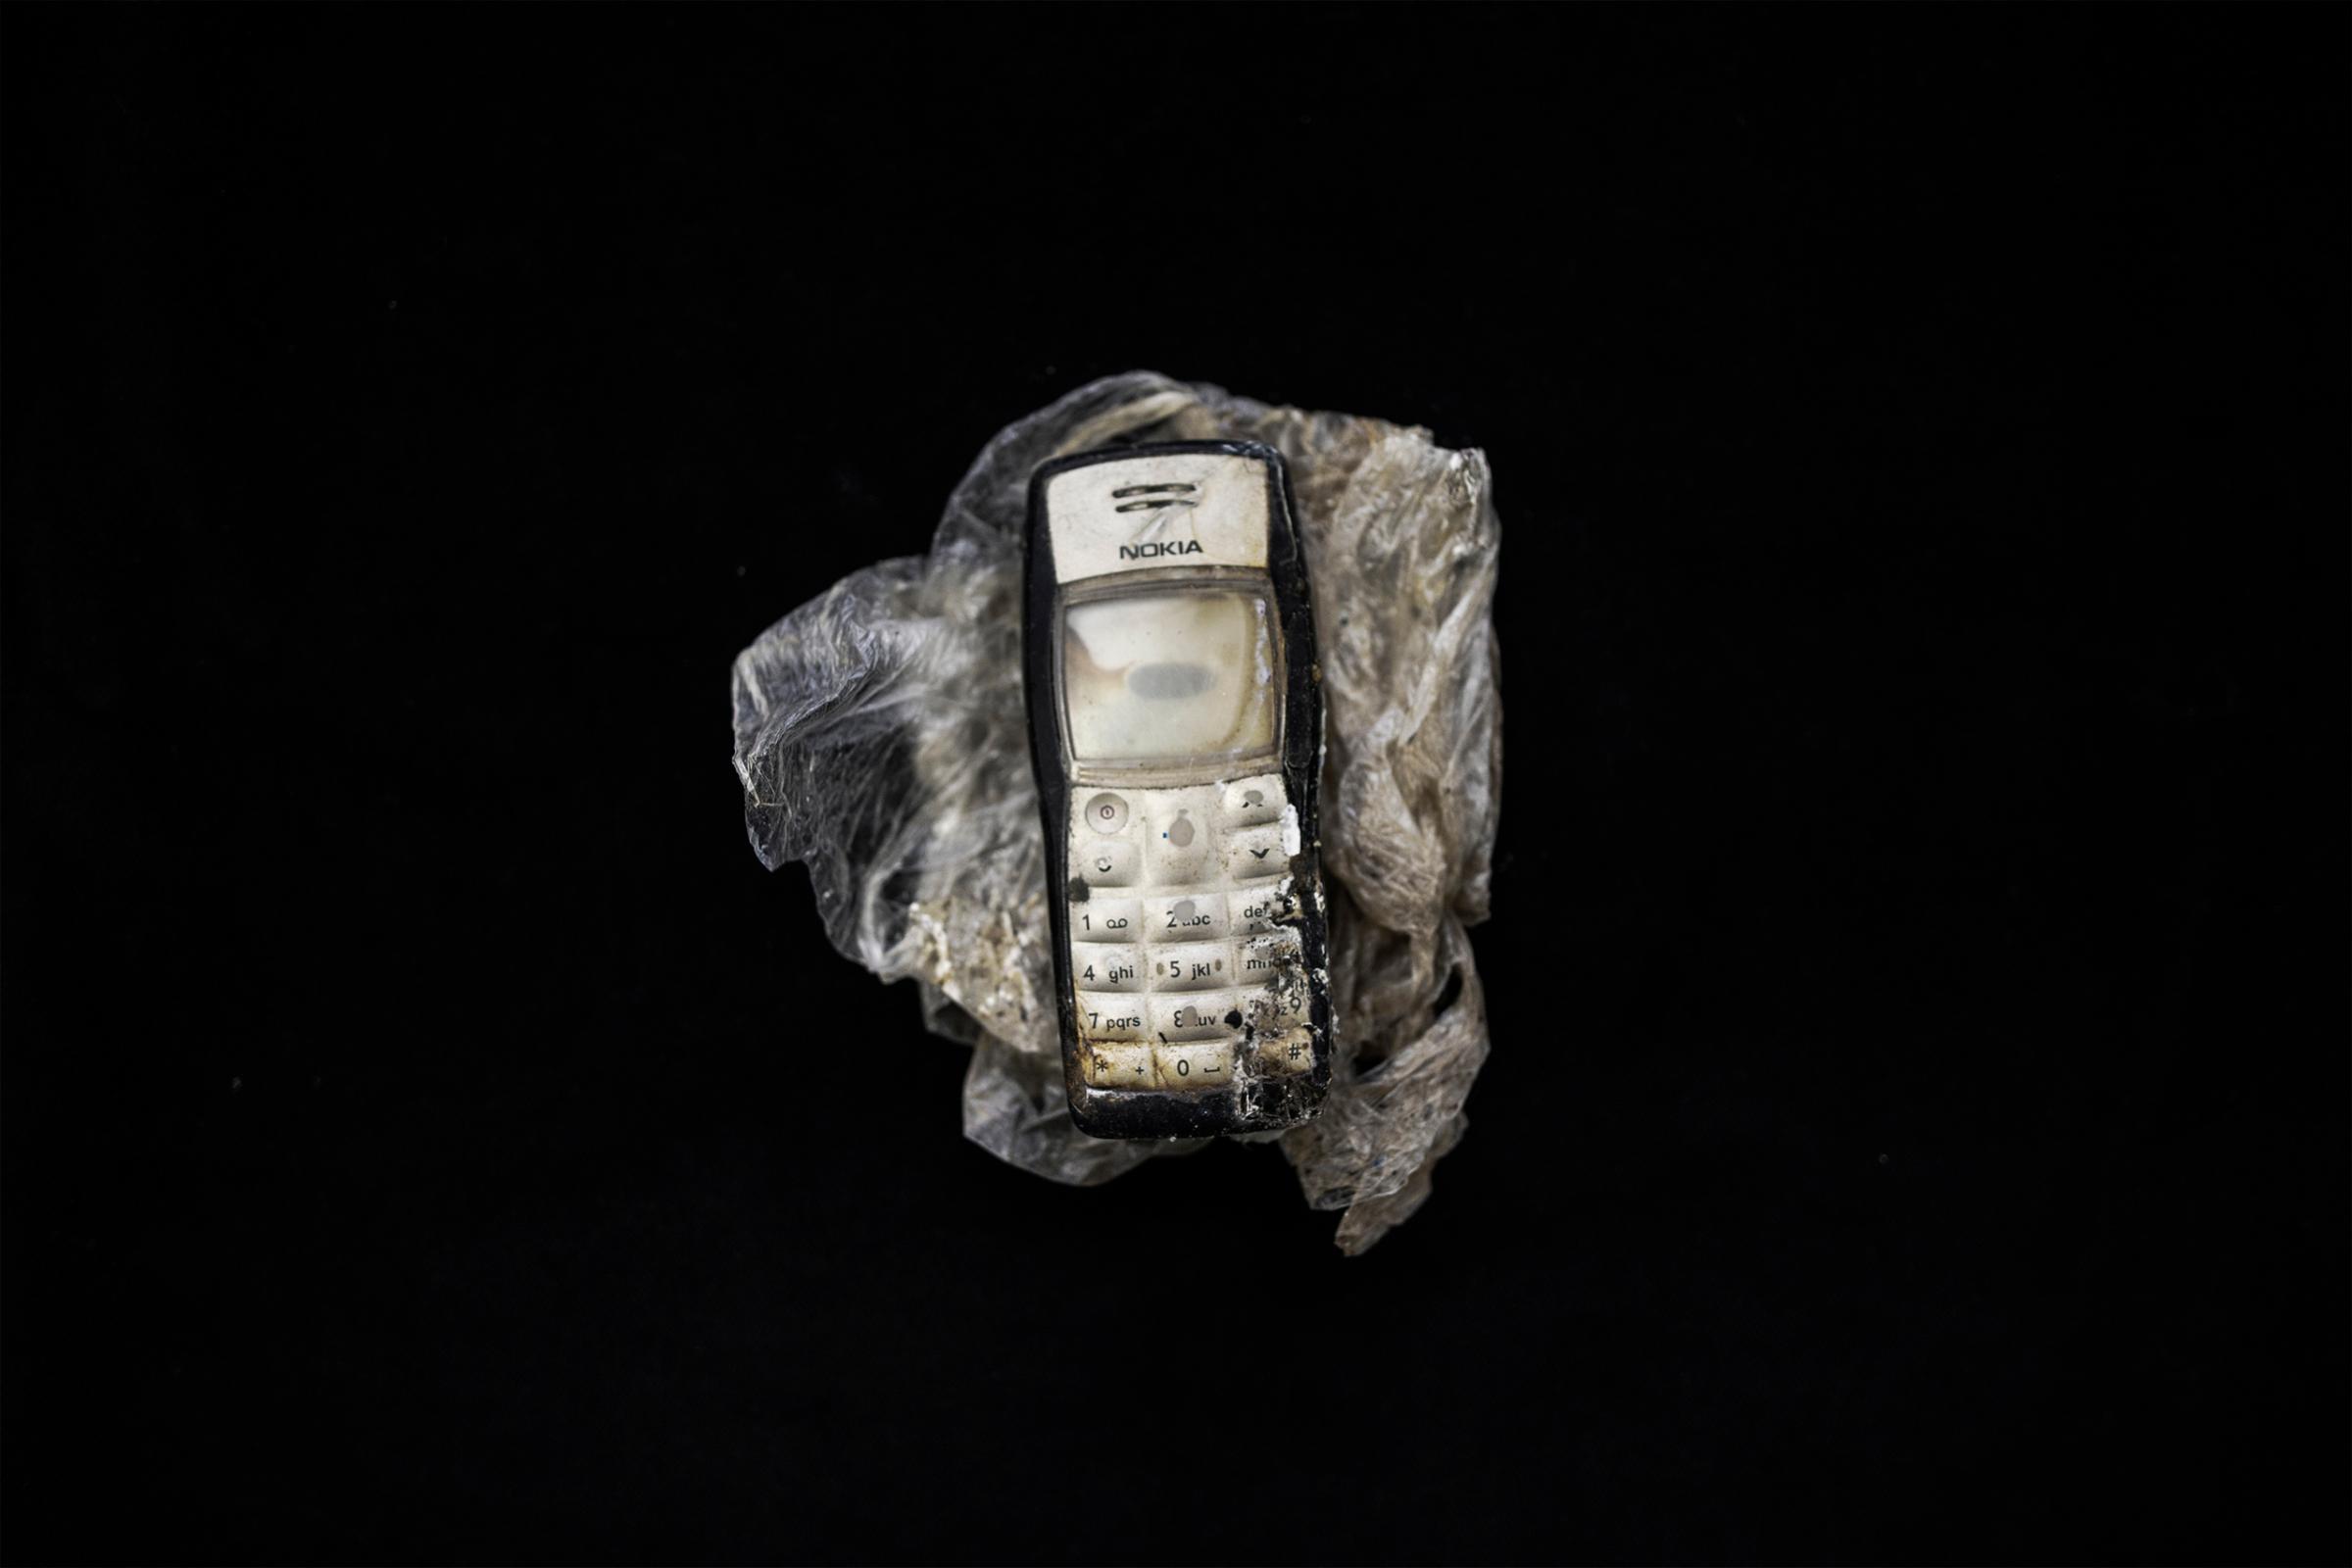 A mobile phone that belonged to a migrant deceased during a Oct. 3, 2013 shipwreck off the Italian island of Lampedusa. Nearly 200 victims remain unidentified, Milan, Italy - Sept. 30, 2015.